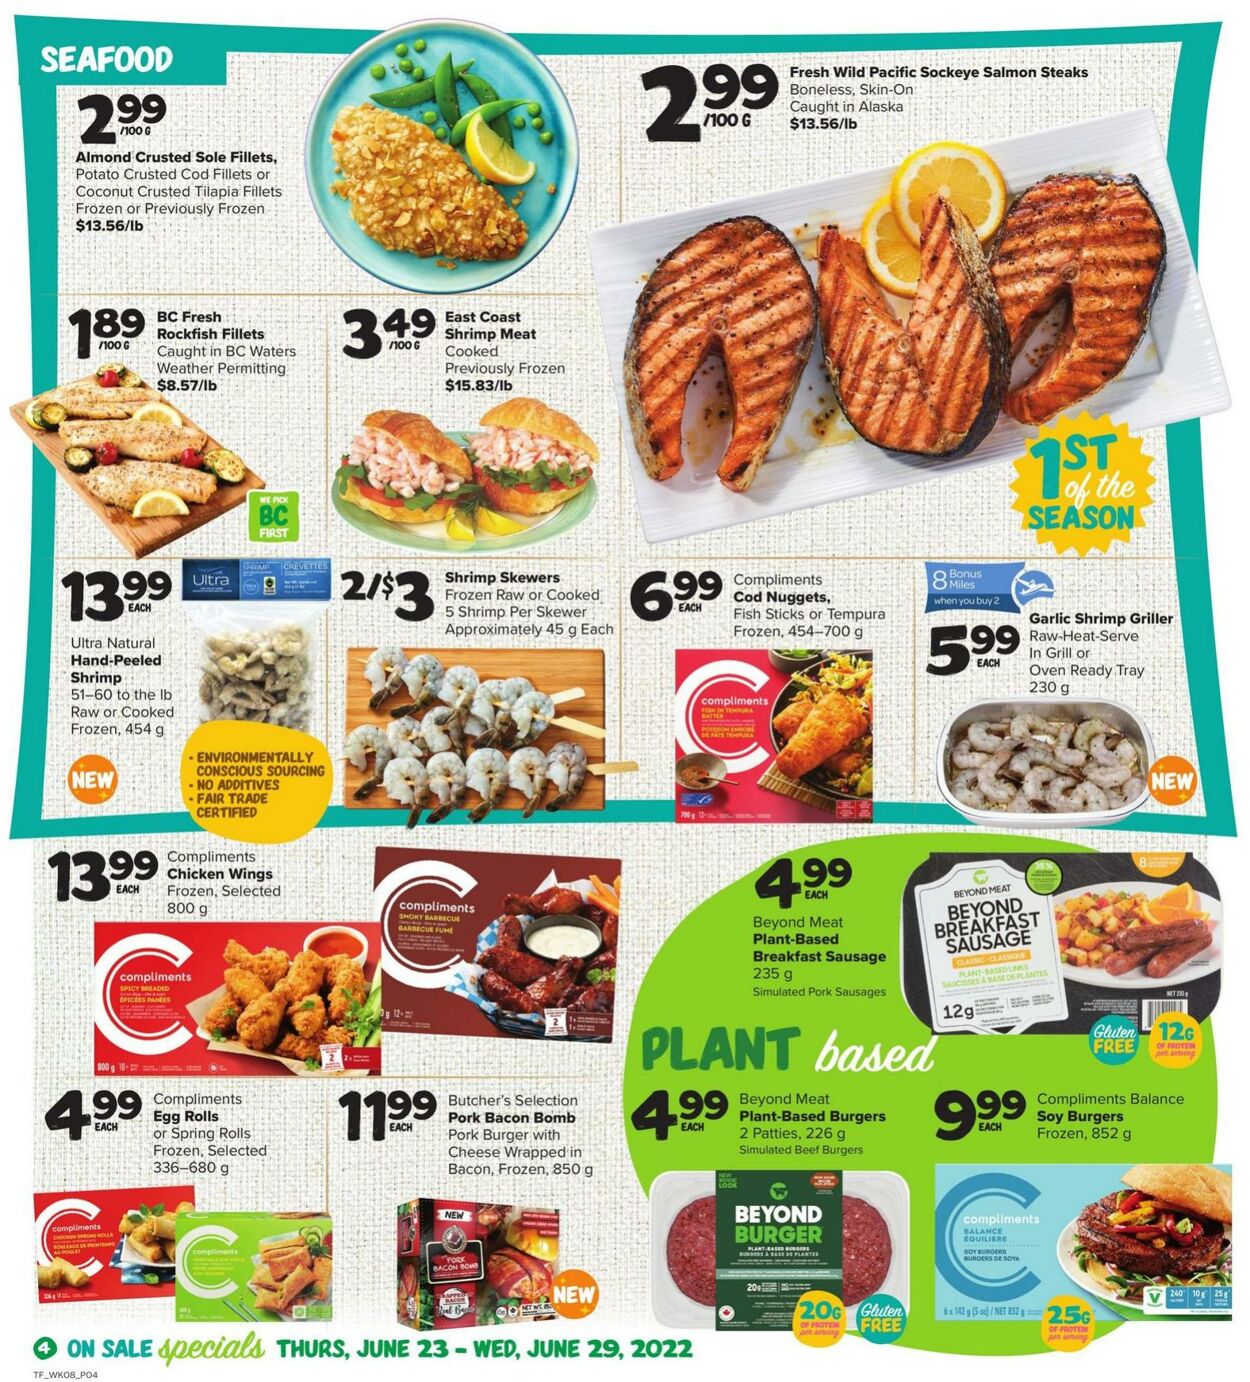 Flyer Thrifty Foods 23.06.2022 - 29.06.2022